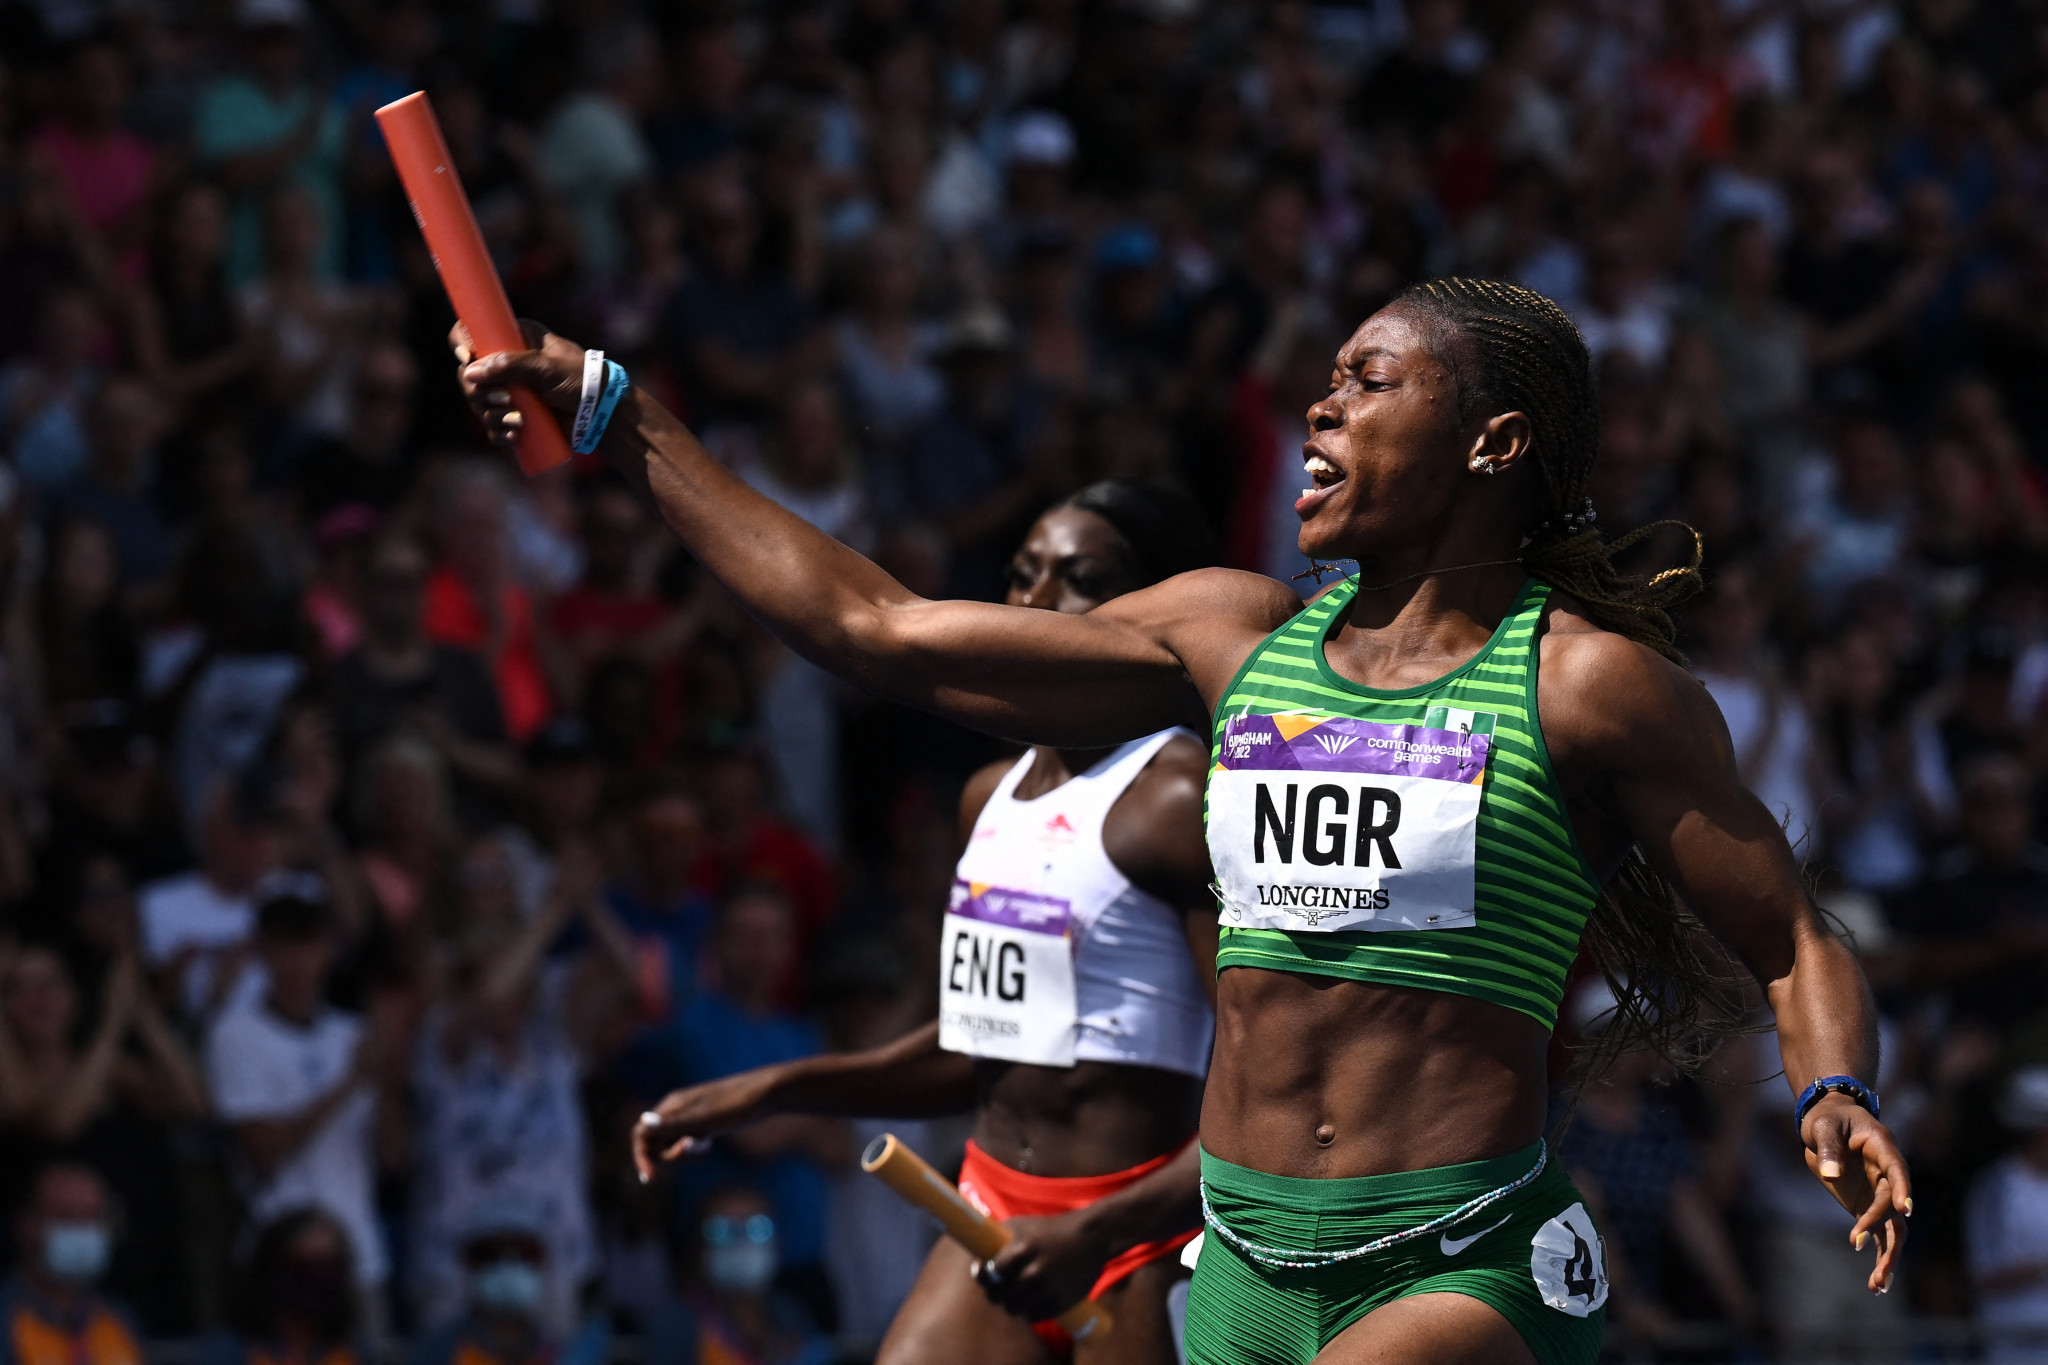 Nigeria faces losing the Commonwealth Games gold medal it won in the 4x100m relay at Birmingham 2022 after Nzubechi Grace Nwokocha tested positive for banned drugs ©Getty Images